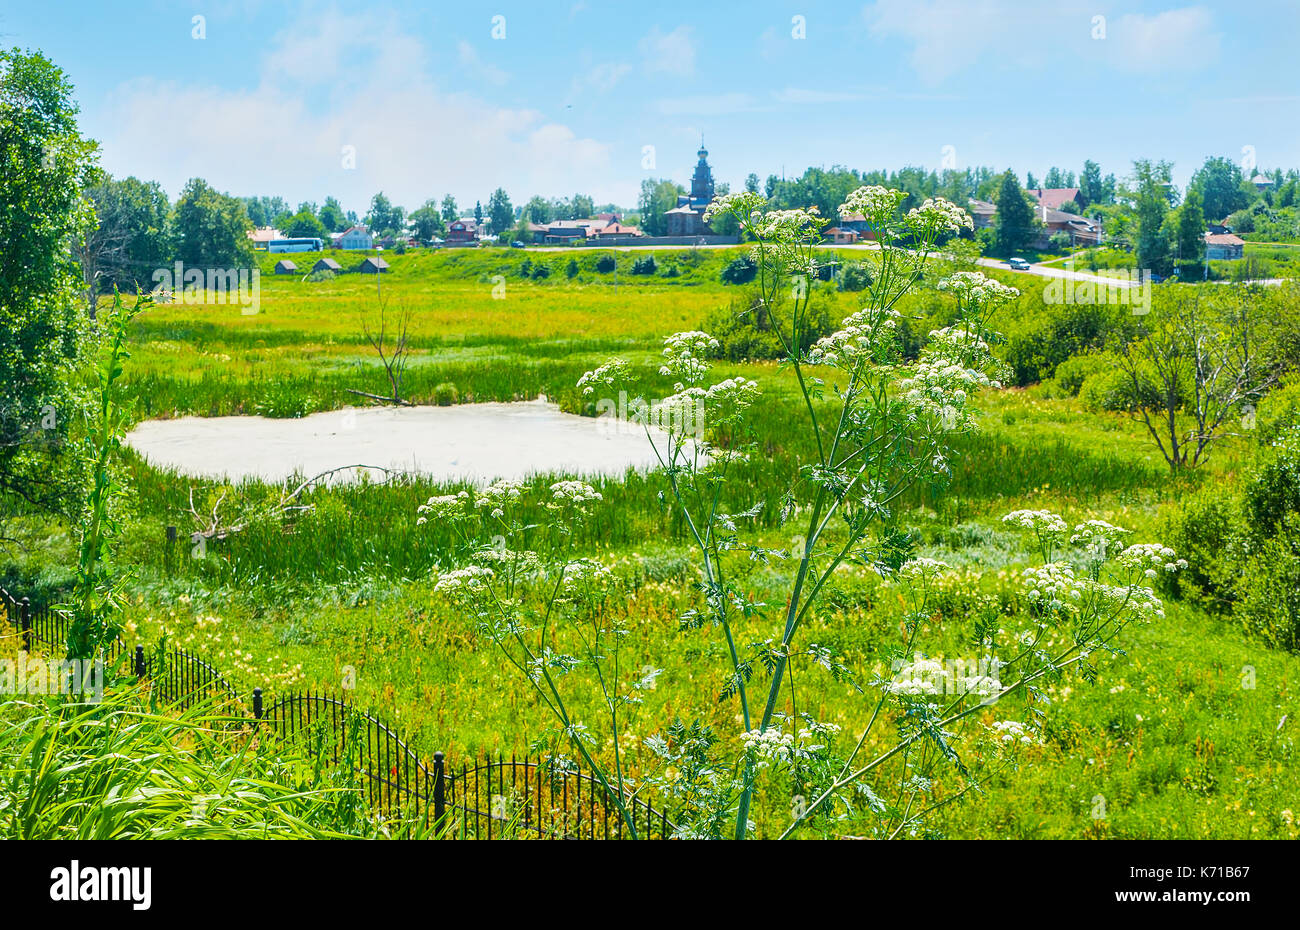 Ilinskiy meadow with a small swamp, lush greenery and poison hemlock on the foreground, the view from historic shaft of Suzdal Kremlin, Russia. Stock Photo